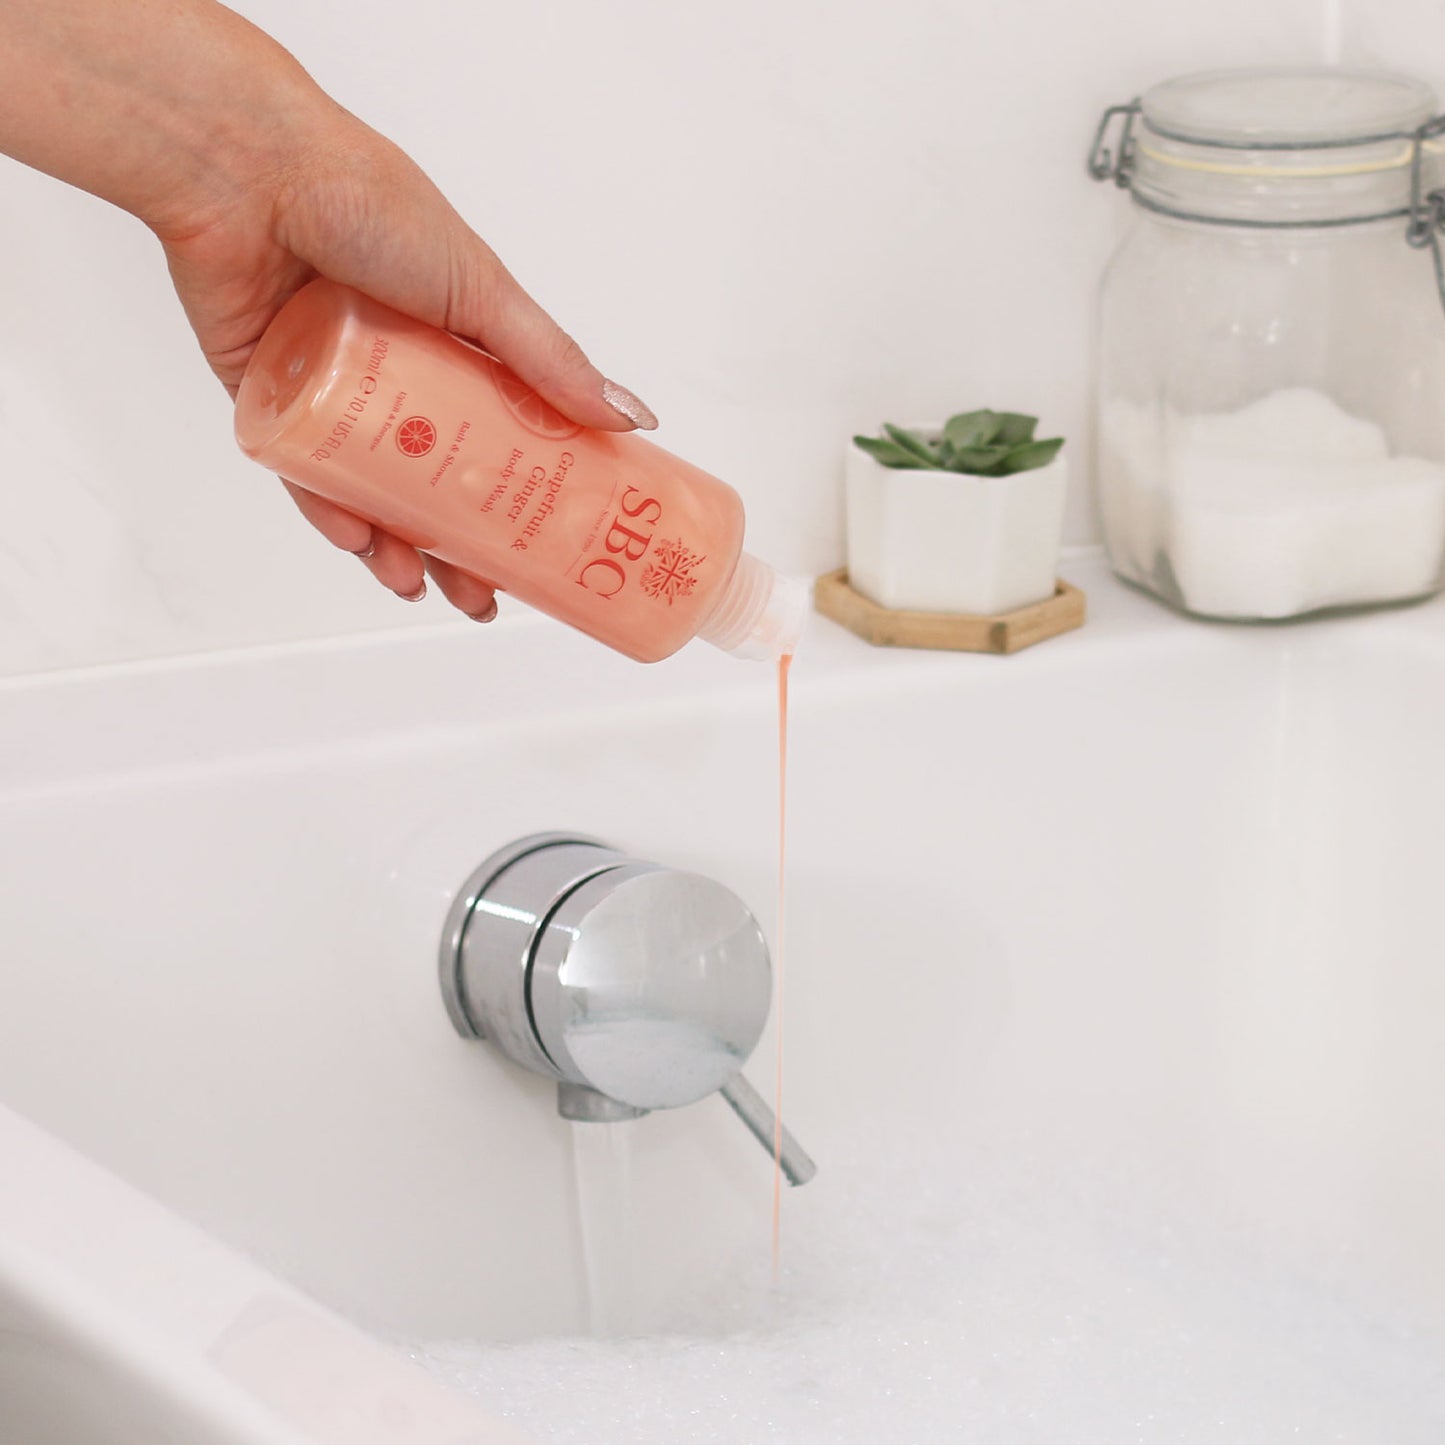 SBC Skincare's Grapefruit & Ginger Body Wash being poured into a running bath 